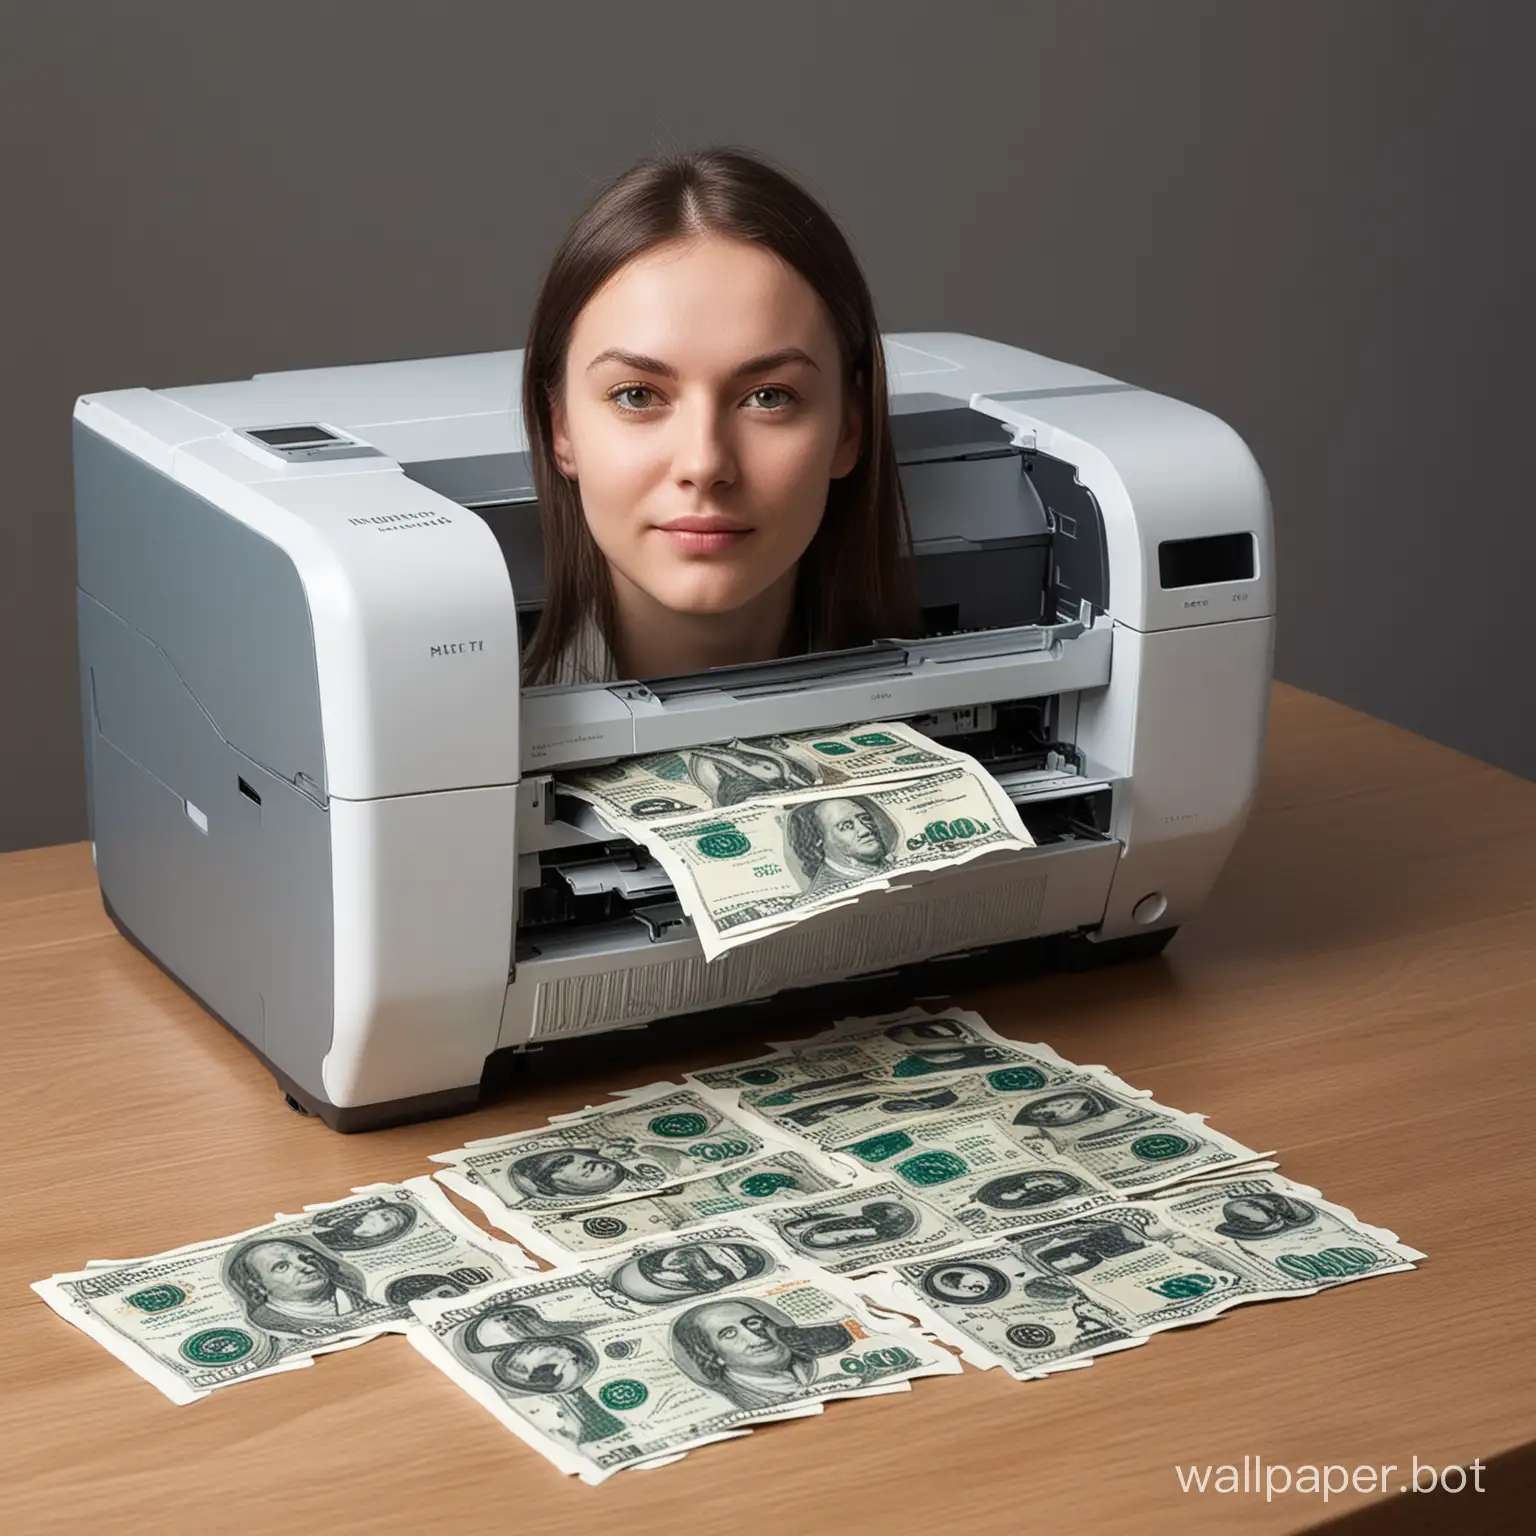 Anti-advertising! Even my printer has learned to make money on neural networks, I will show you as an example how to earn 5000 money per day :)

© Melnikov.VG, melnikov.vg

https://pay.cloudtips.ru/p/cb63eb8f

^^^